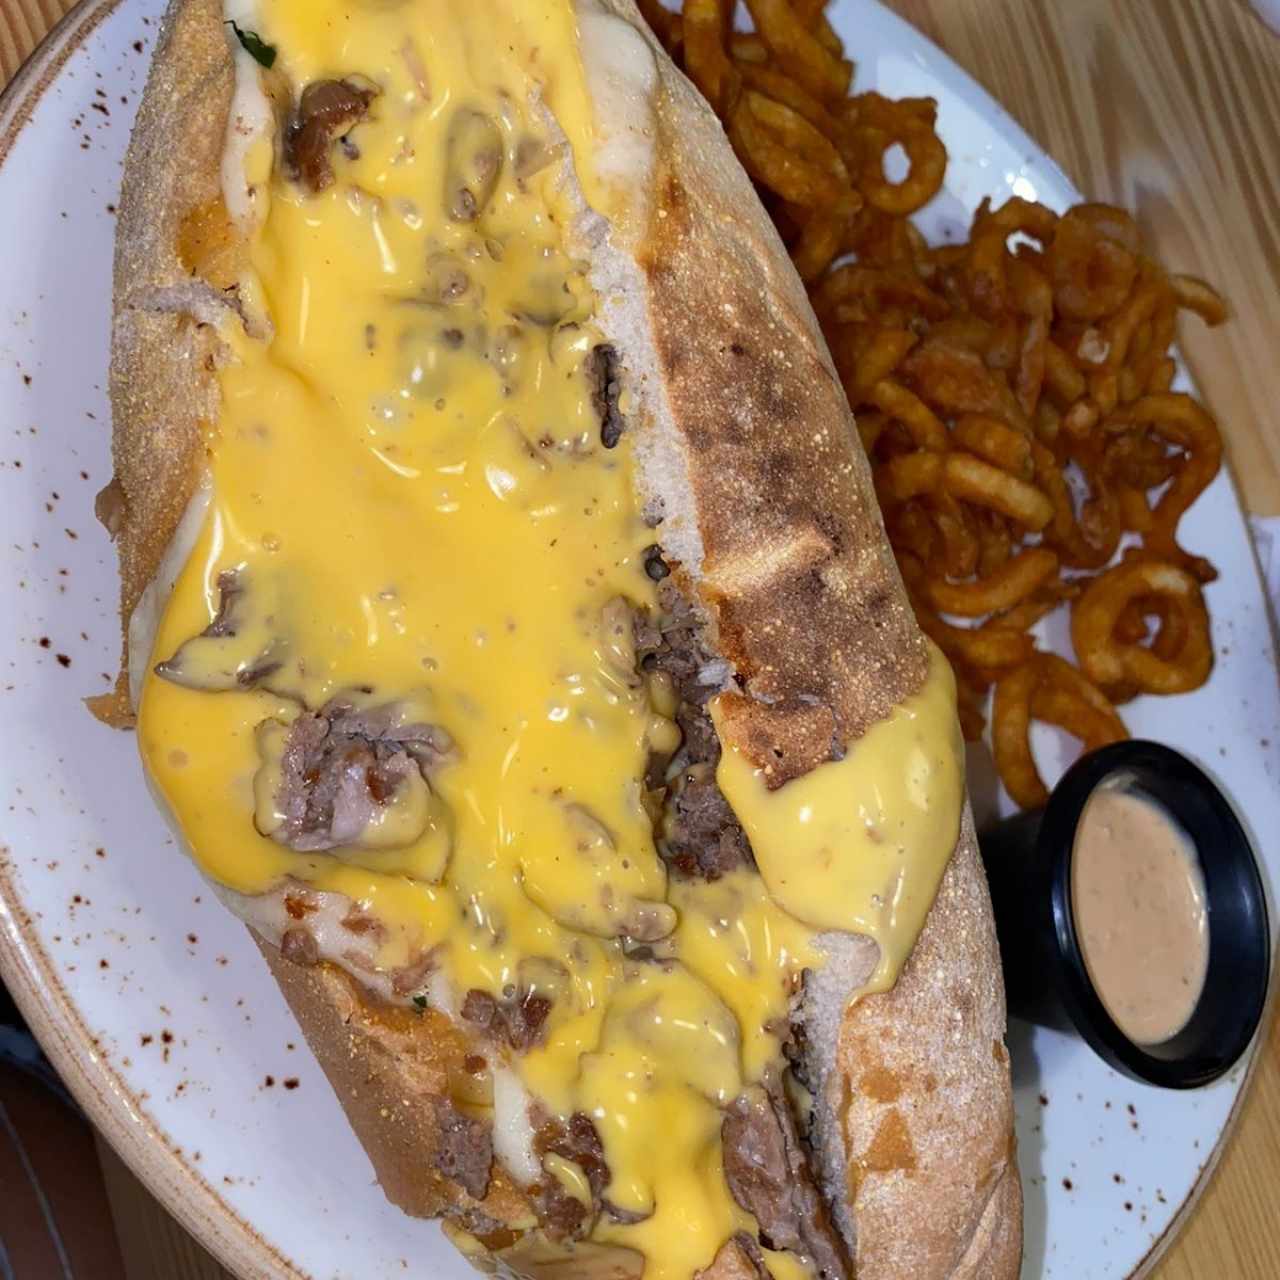 Philly cheeses steak